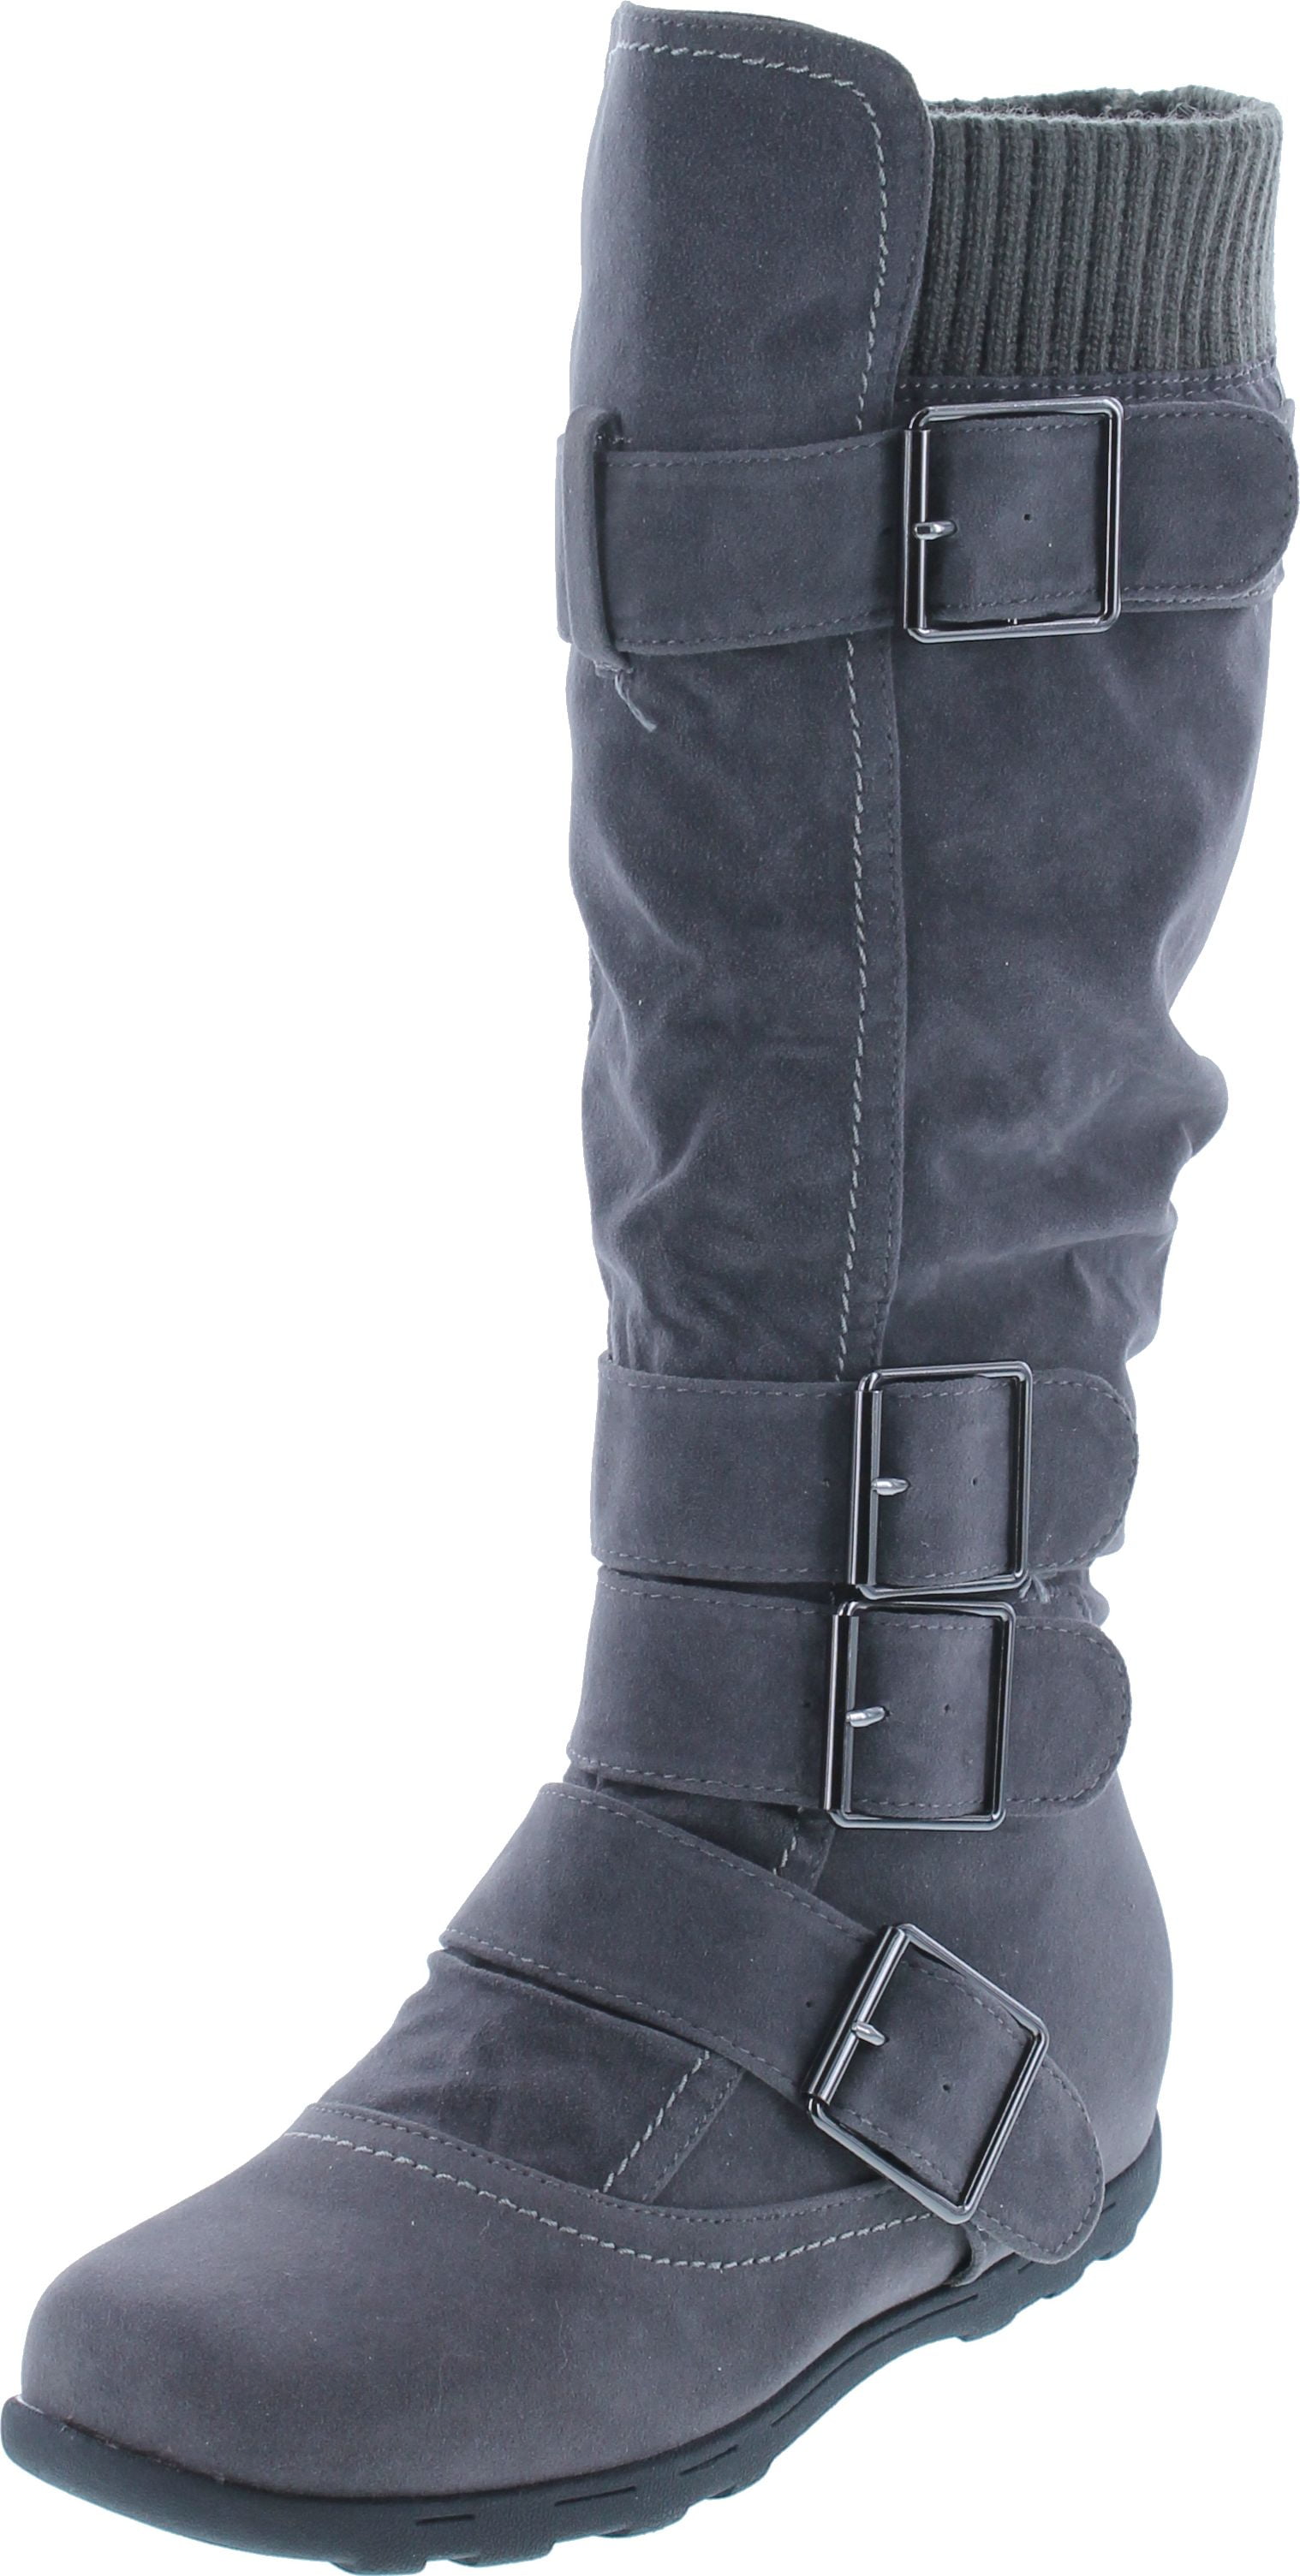 Twisted Womens Faux Leather Wide Width Slouchy Buckle Strap Mid Calf Boots